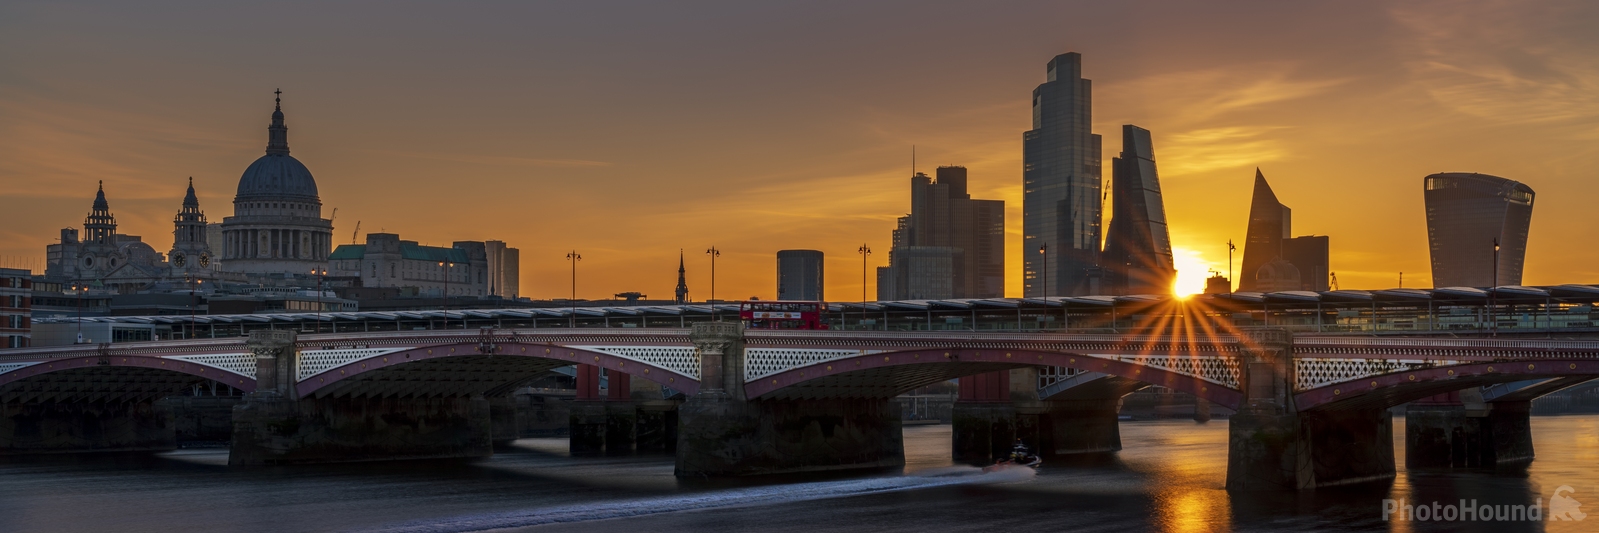 Image of Oxo Tower Wharf by Doug Stratton